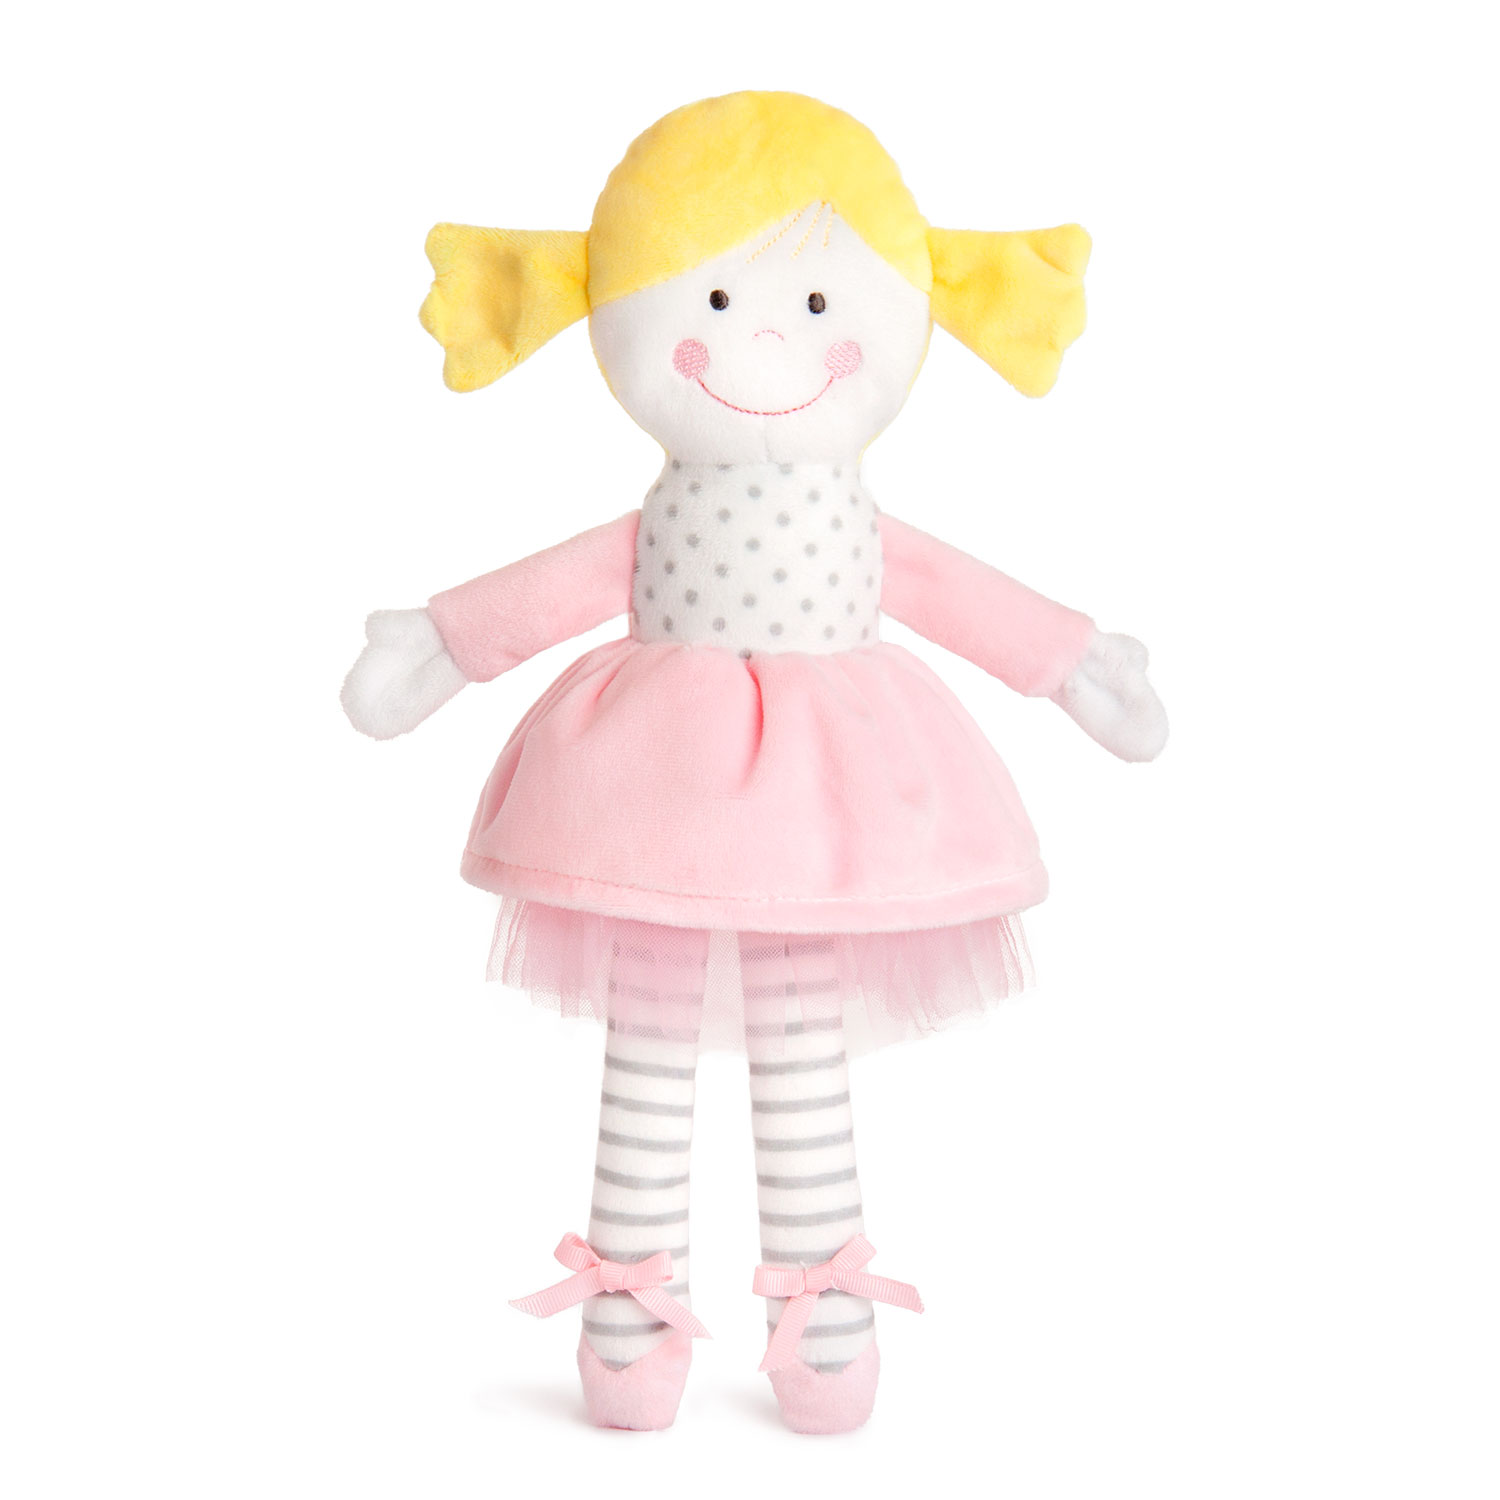 Baby soft doll DOLLY - Yellow